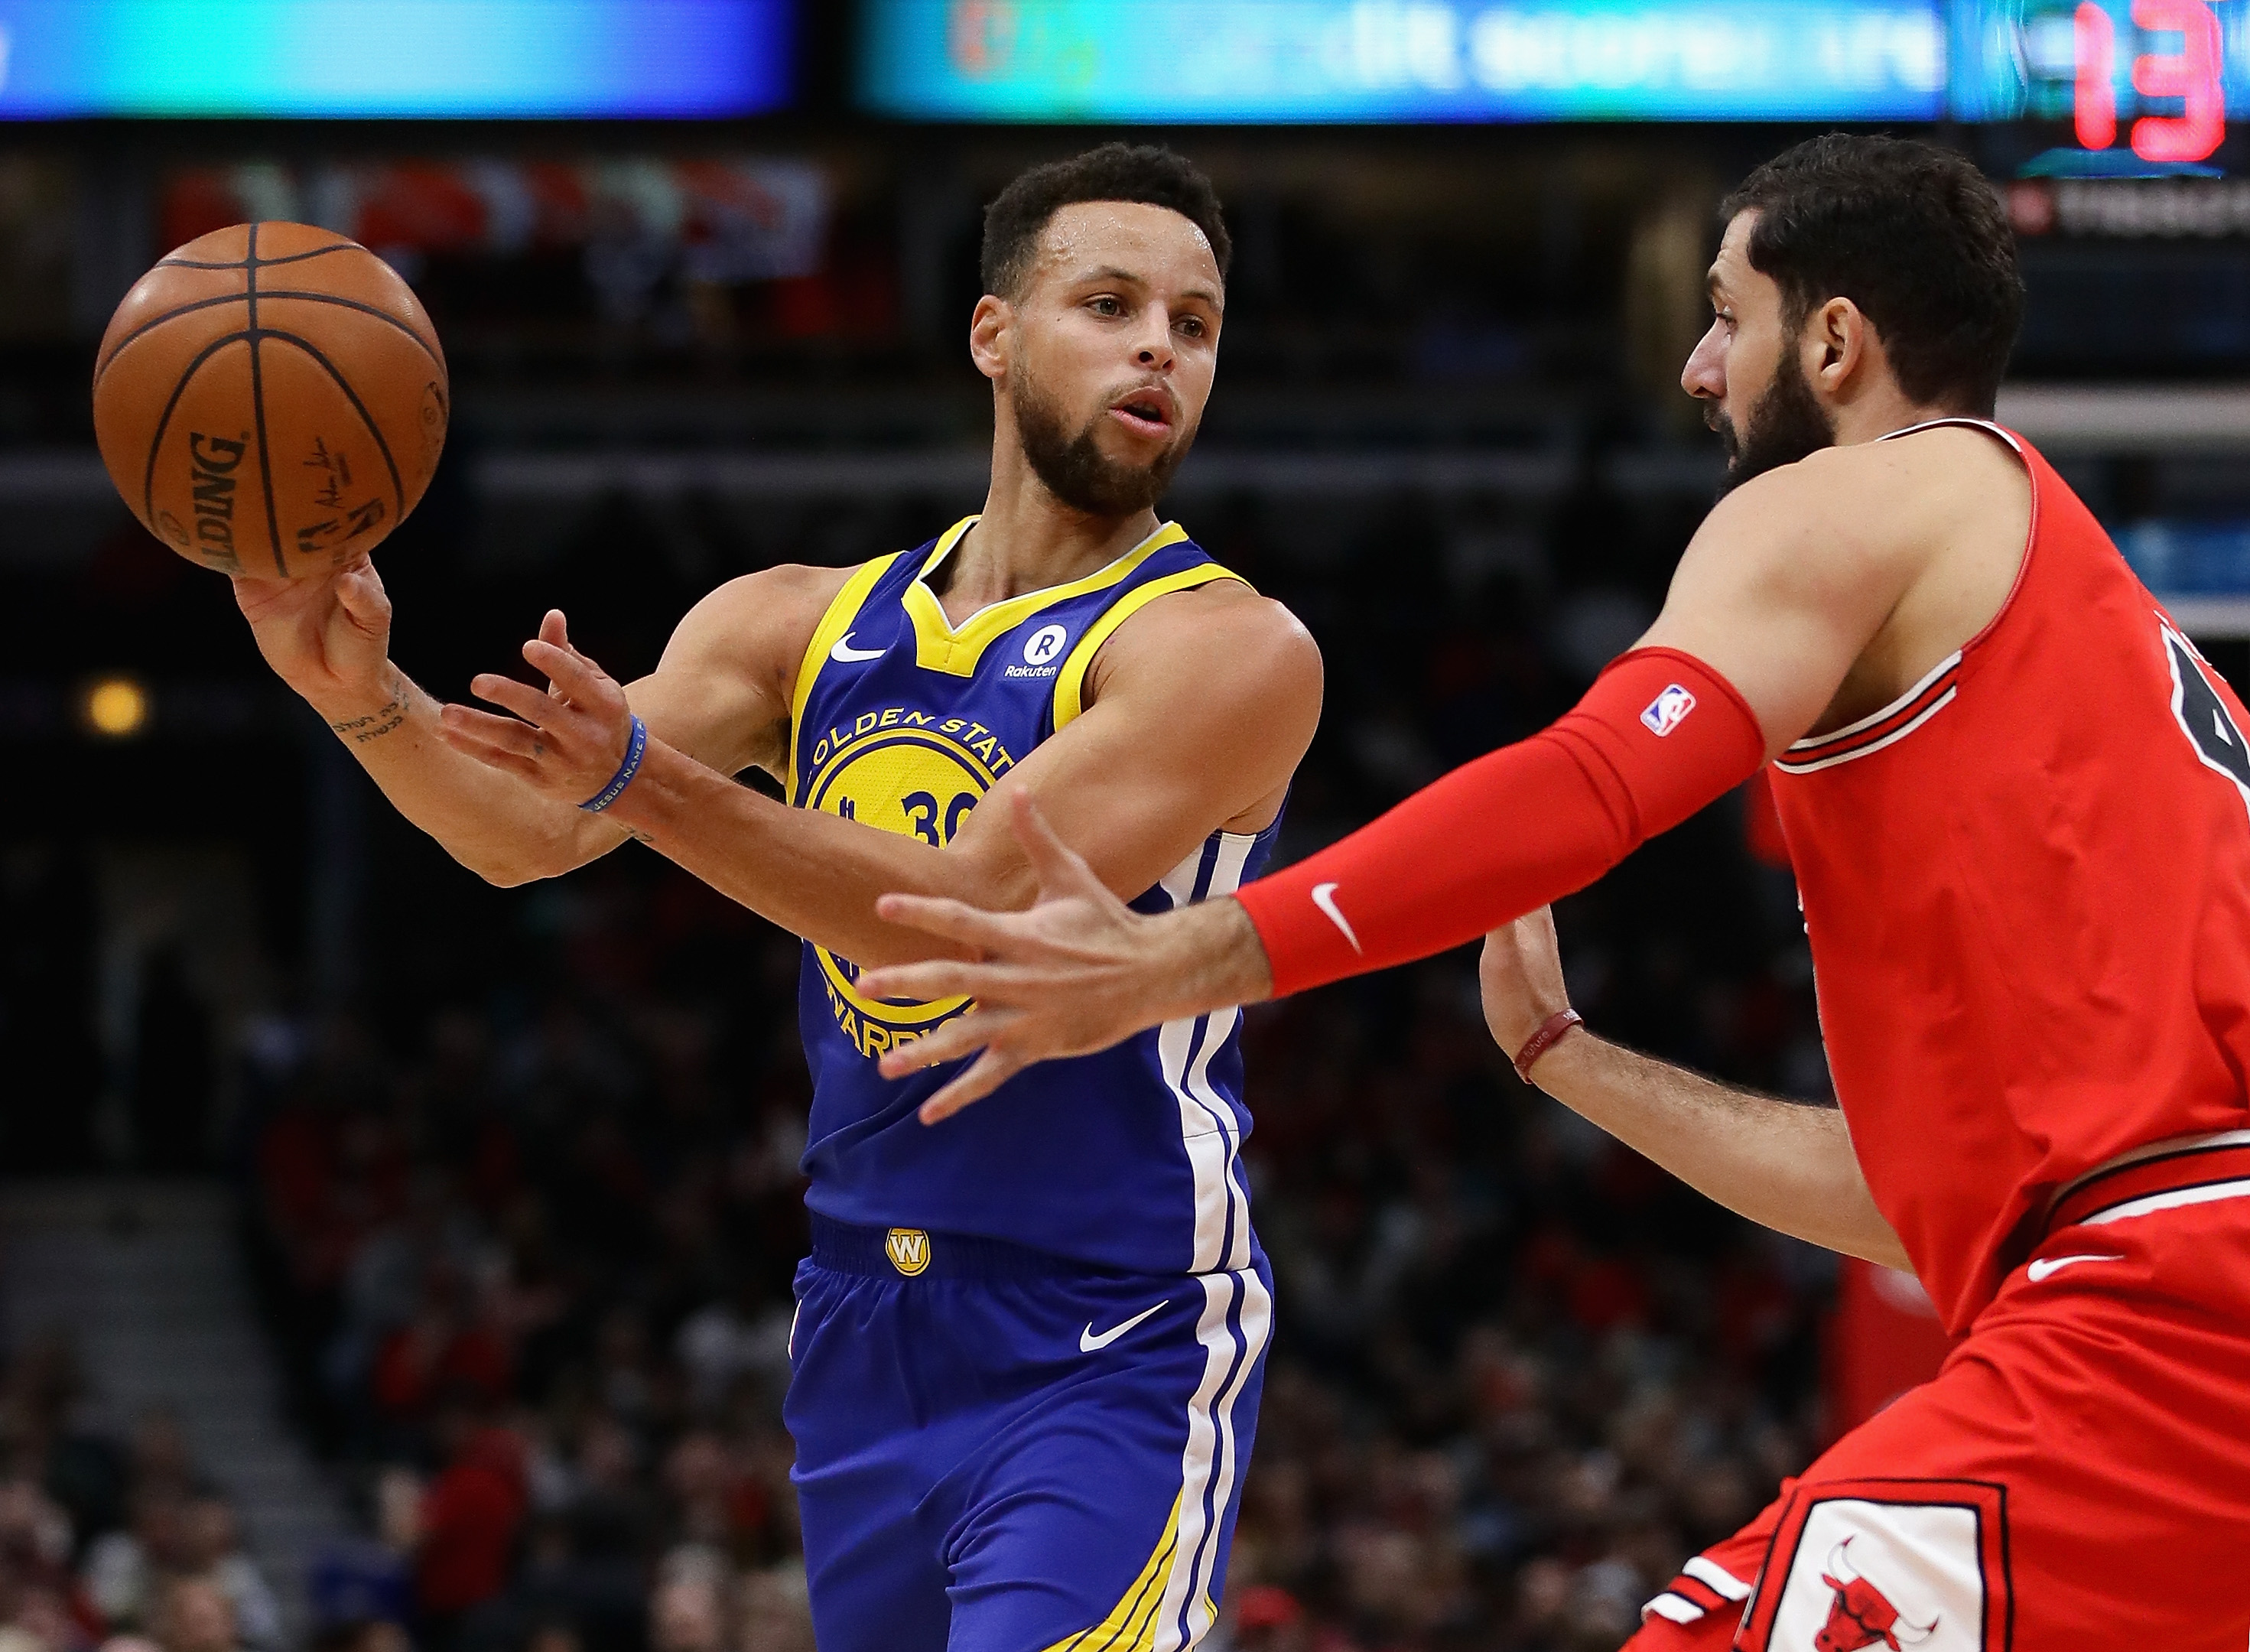 NBA 2018  Stephen Curry has most jersey sales at home; LeBron